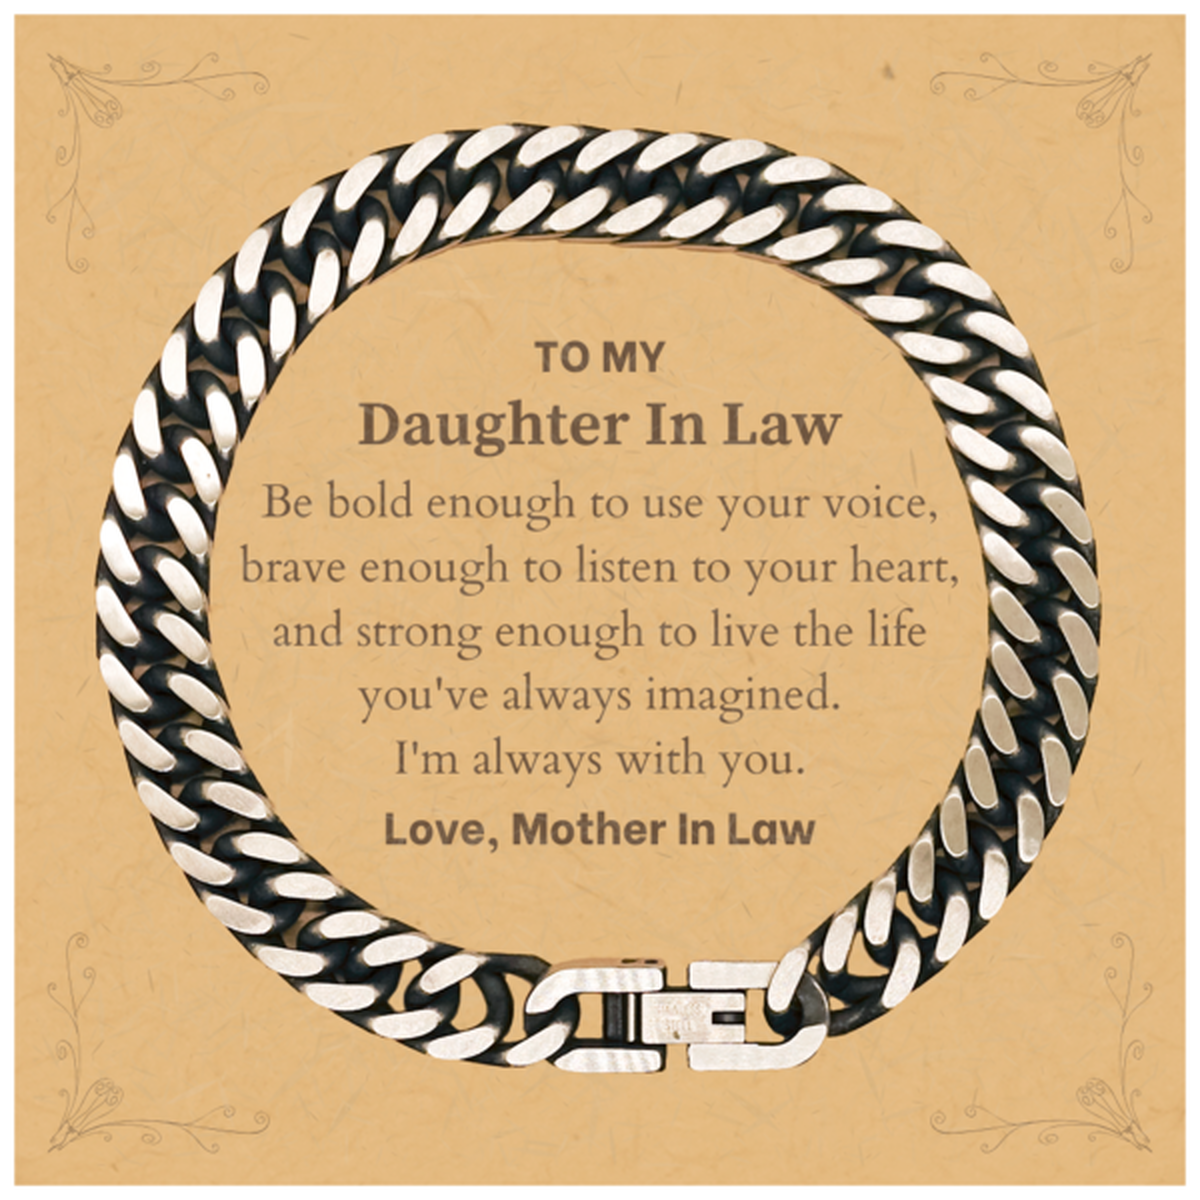 Keepsake Daughter In Law Cuban Link Chain Bracelet Gift Idea Graduation Christmas Birthday Daughter In Law from Mother In Law, Daughter In Law Be bold enough to use your voice, brave enough to listen to your heart. Love, Mother In Law